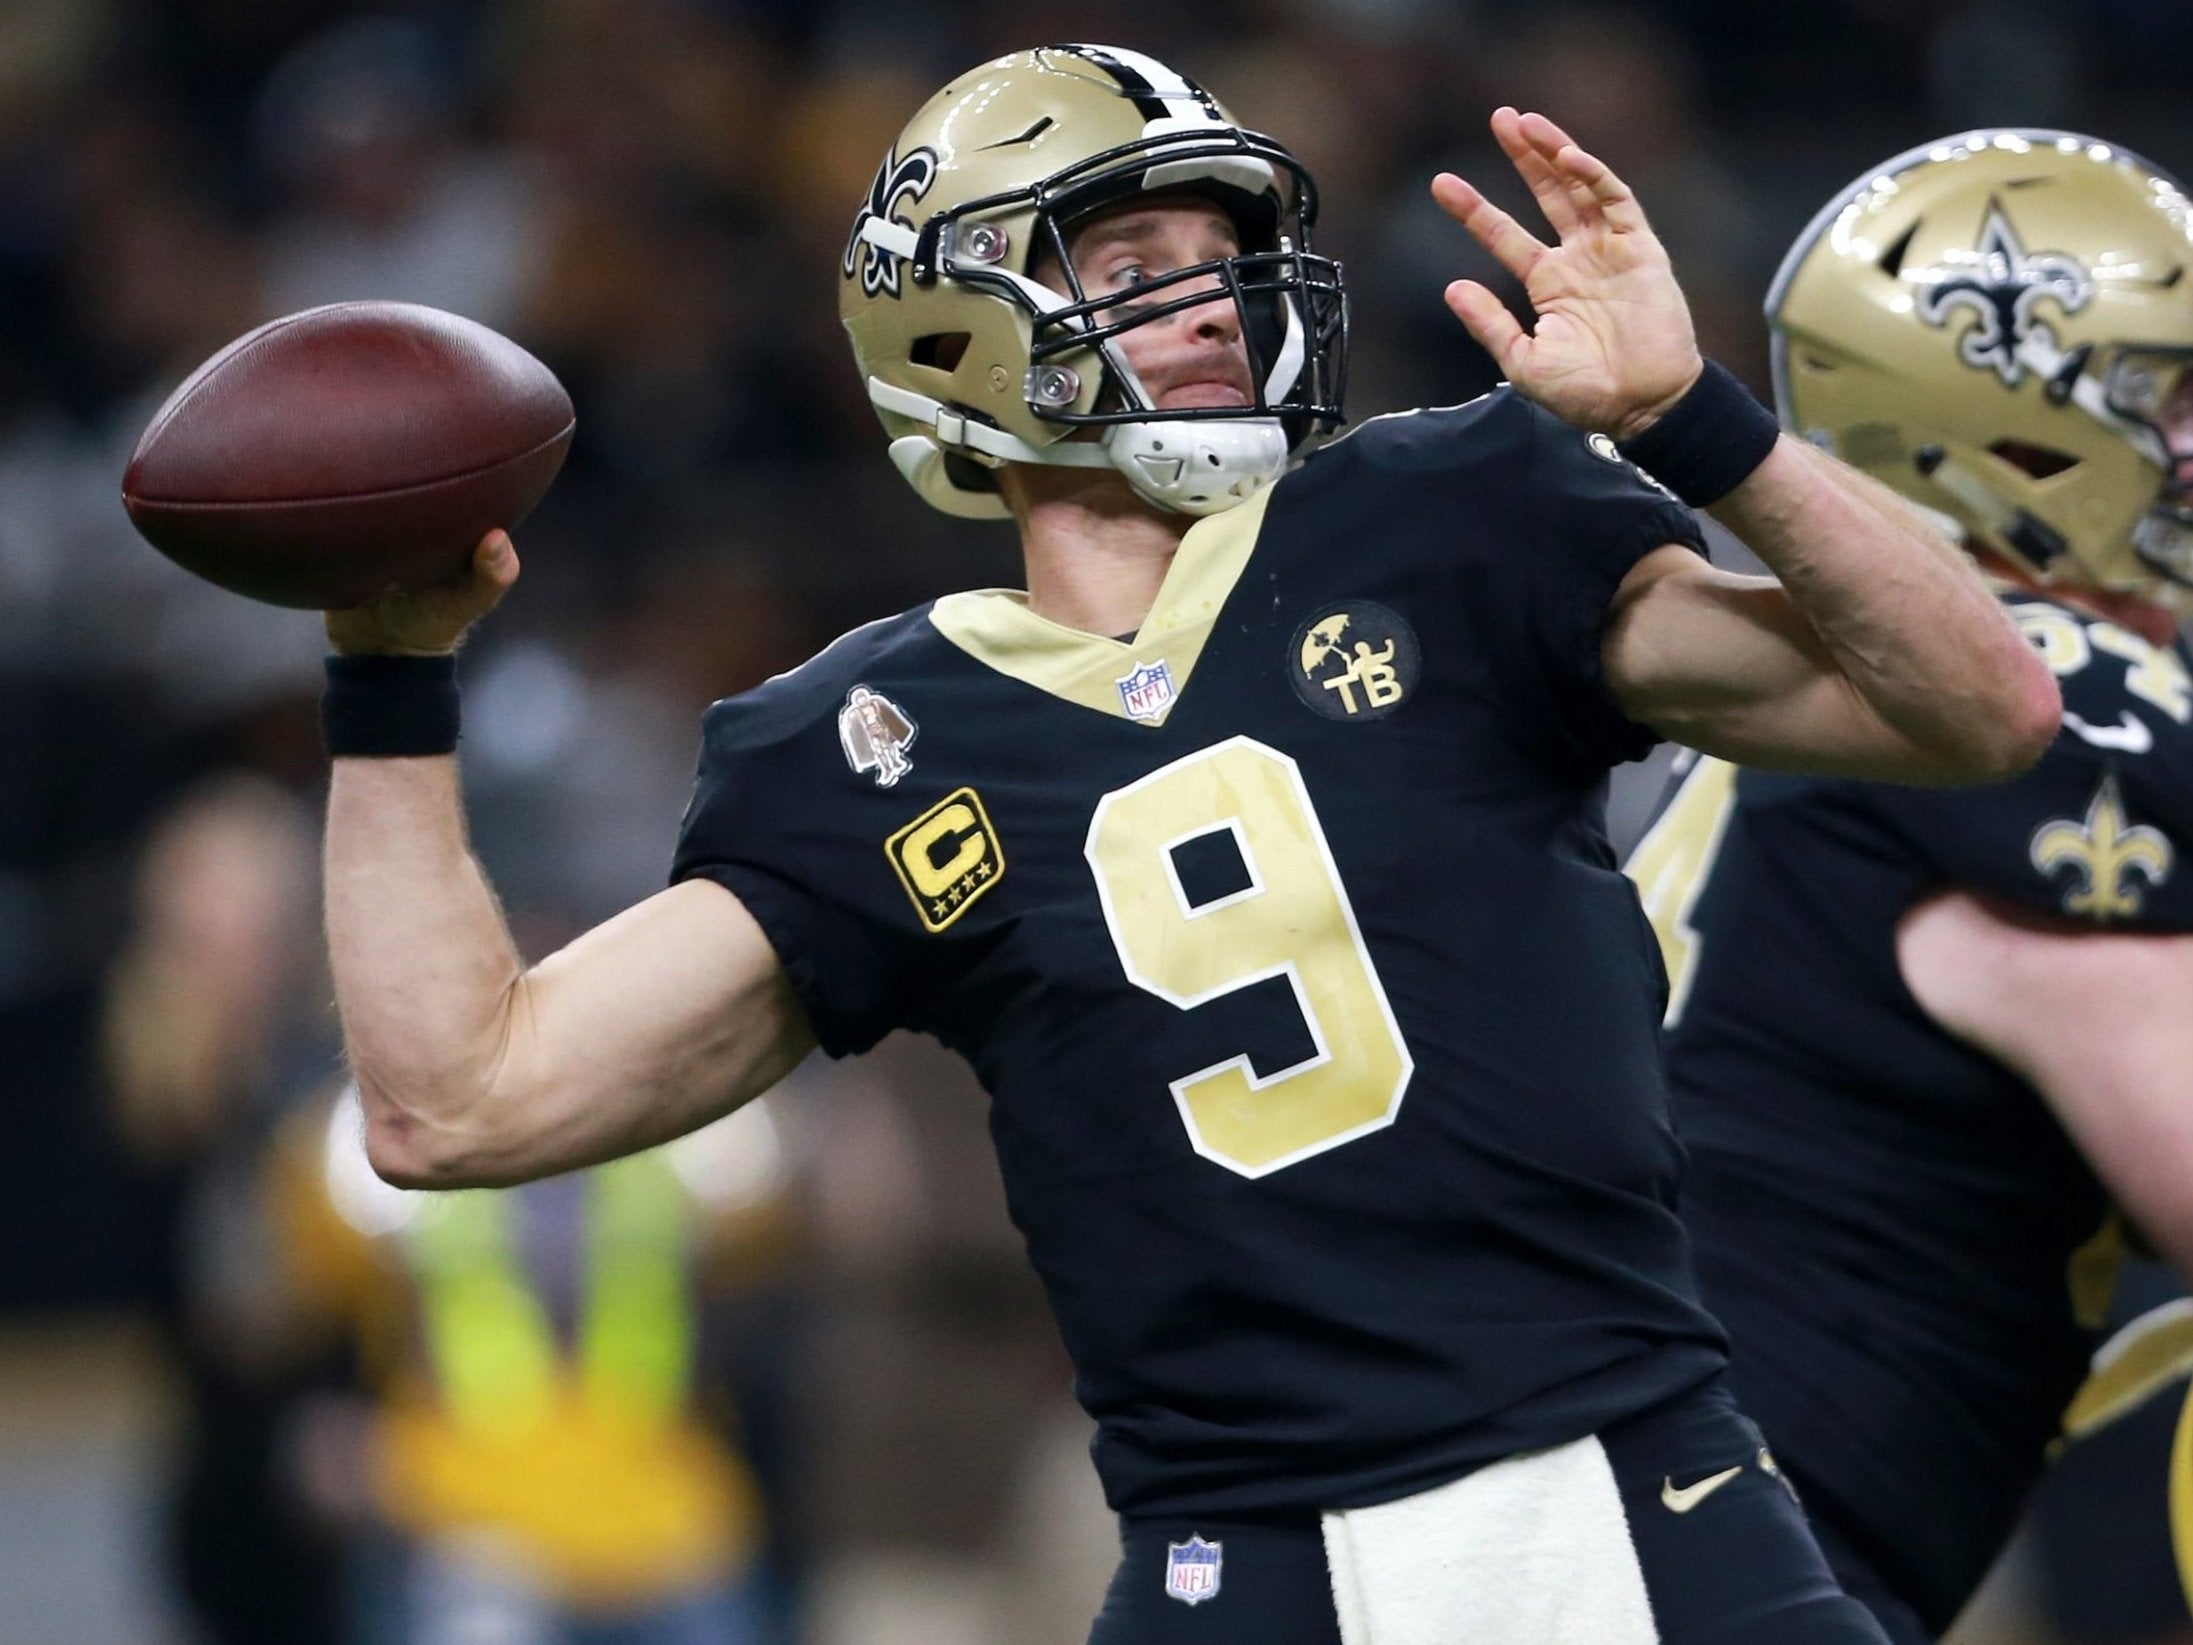 Brees will lead his New Orleans Saints into battle this weekend